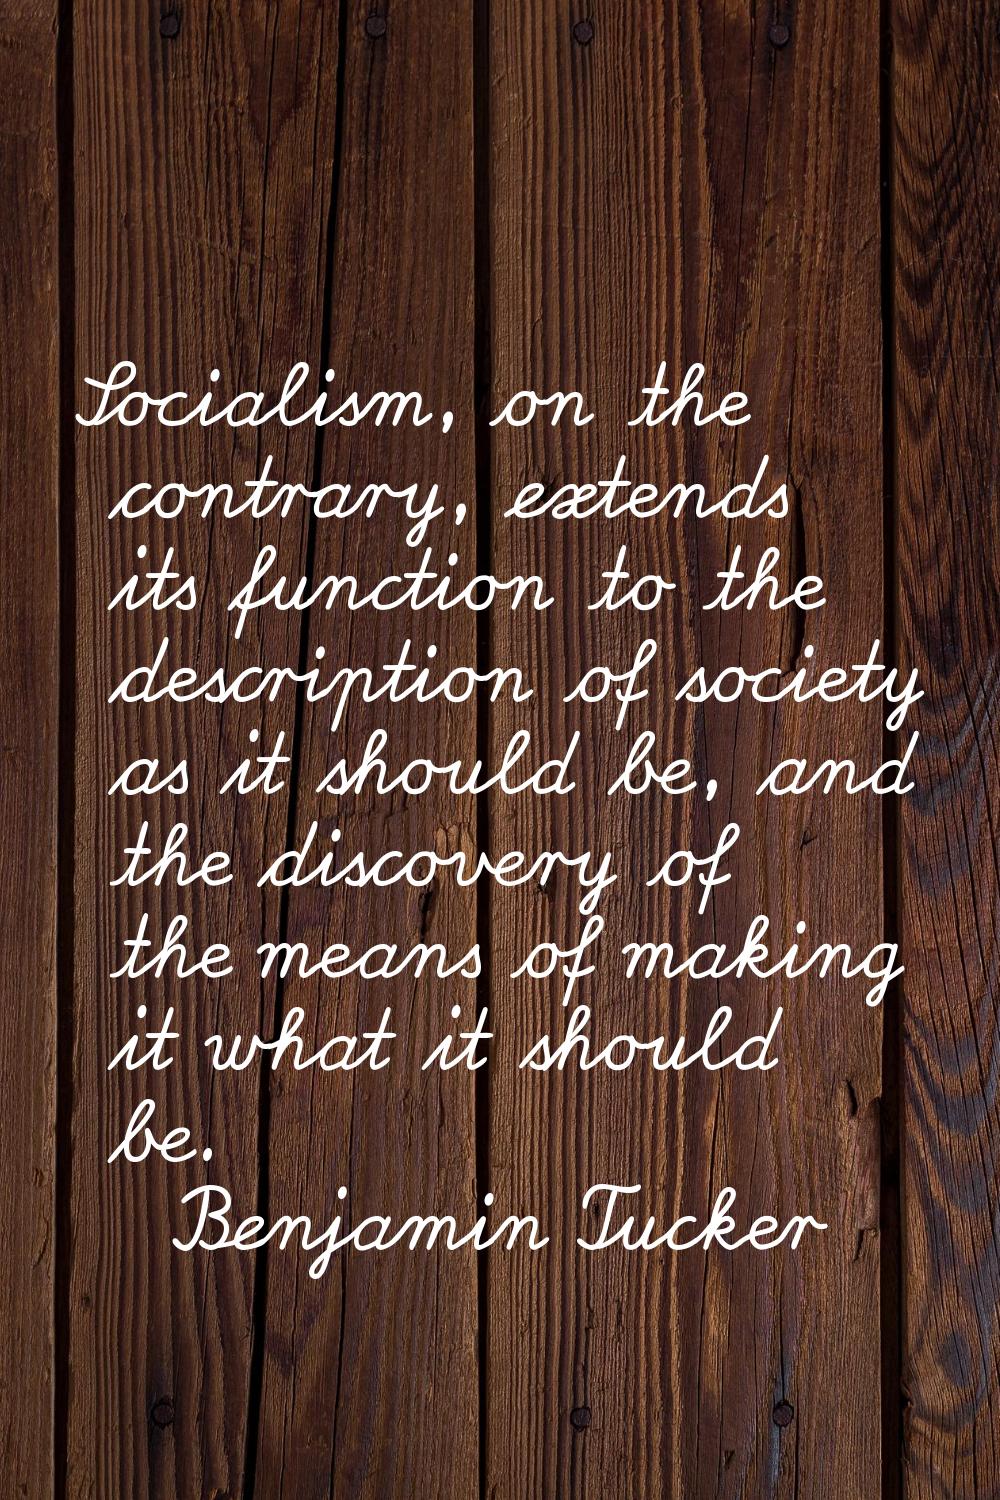 Socialism, on the contrary, extends its function to the description of society as it should be, and